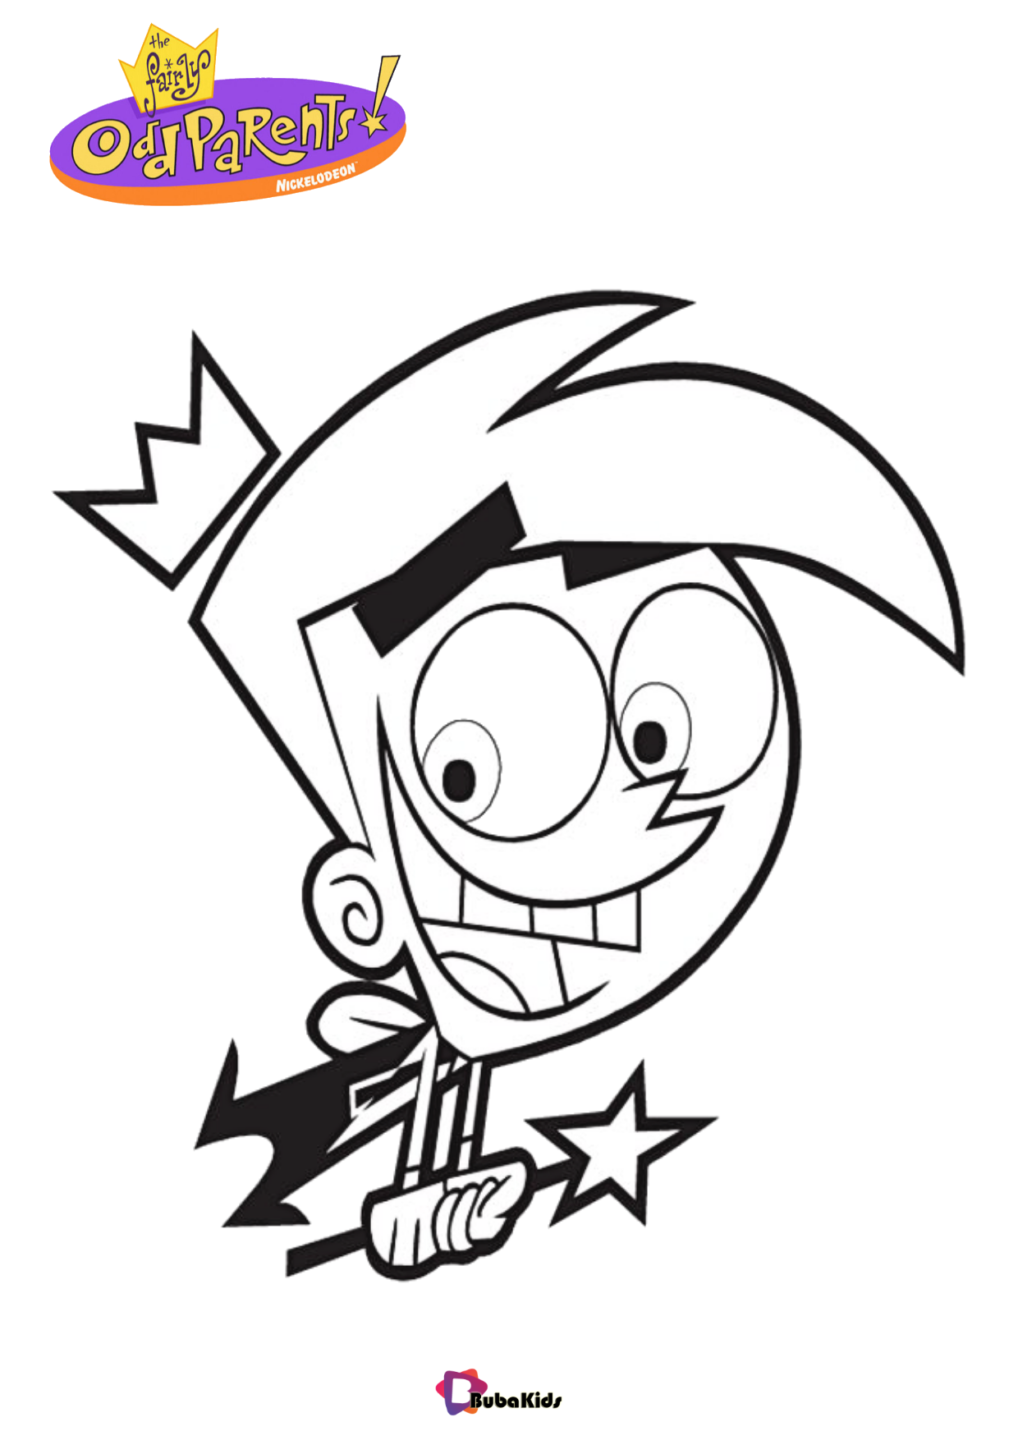 Timmy Turner character from Fairly Oddparents Nickelodeon tv series coloring page